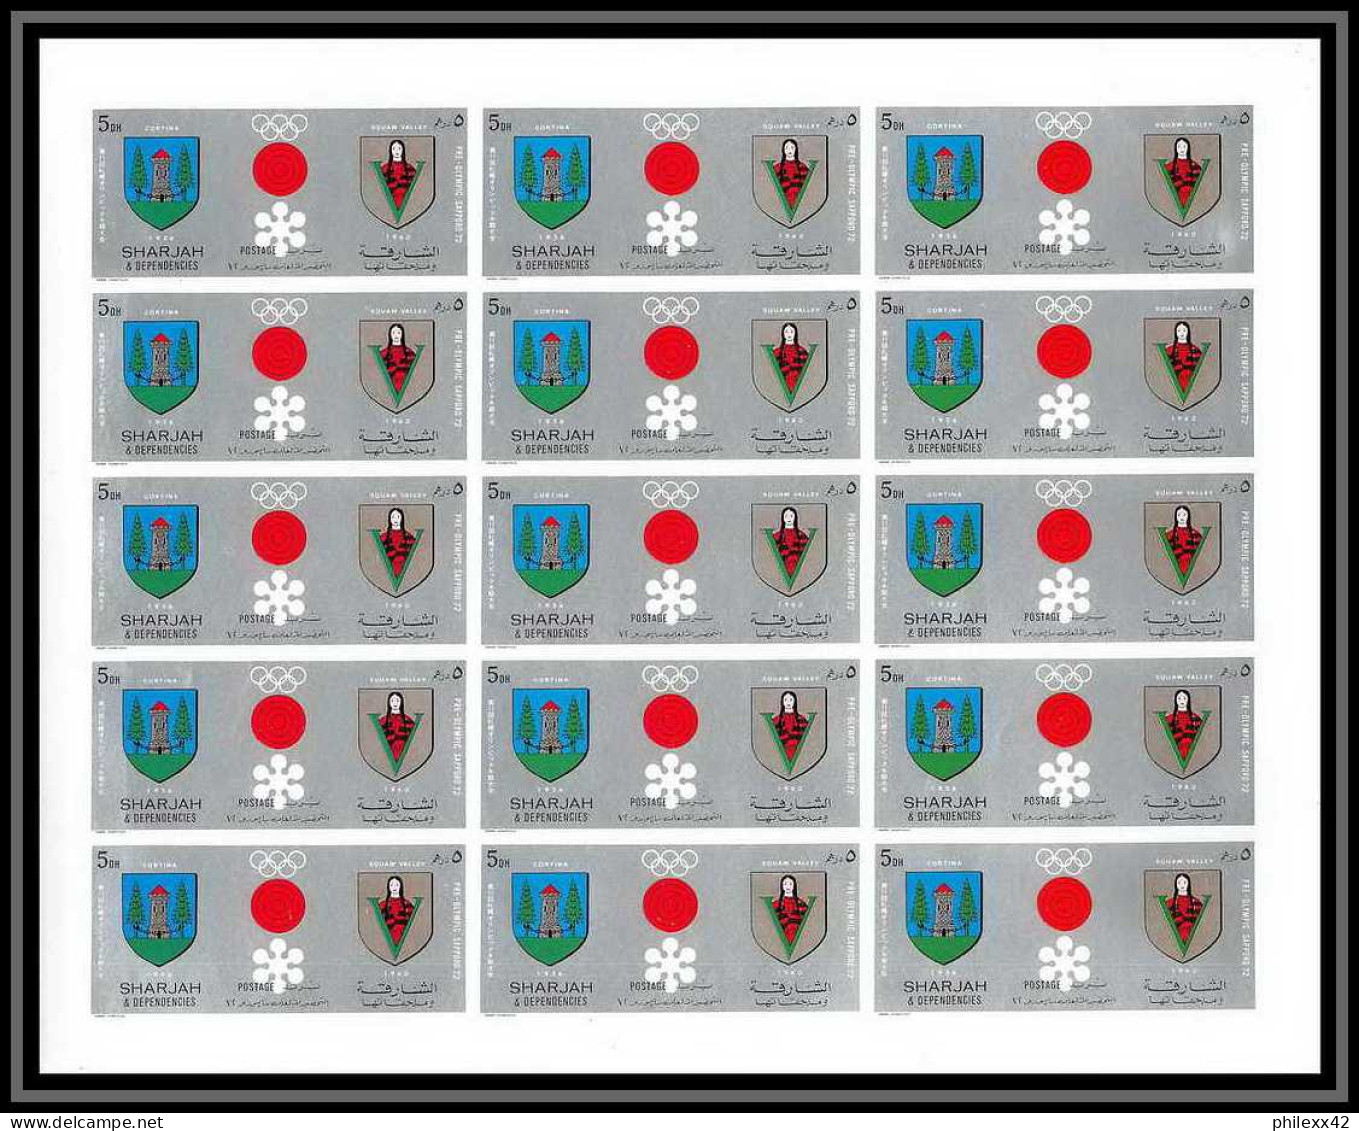 100c Sharjah MNH ** N° 825 / 834 B non dentelé (Imperf) jeux olympiques (olympic games) sapporo 72 feuilles sheets